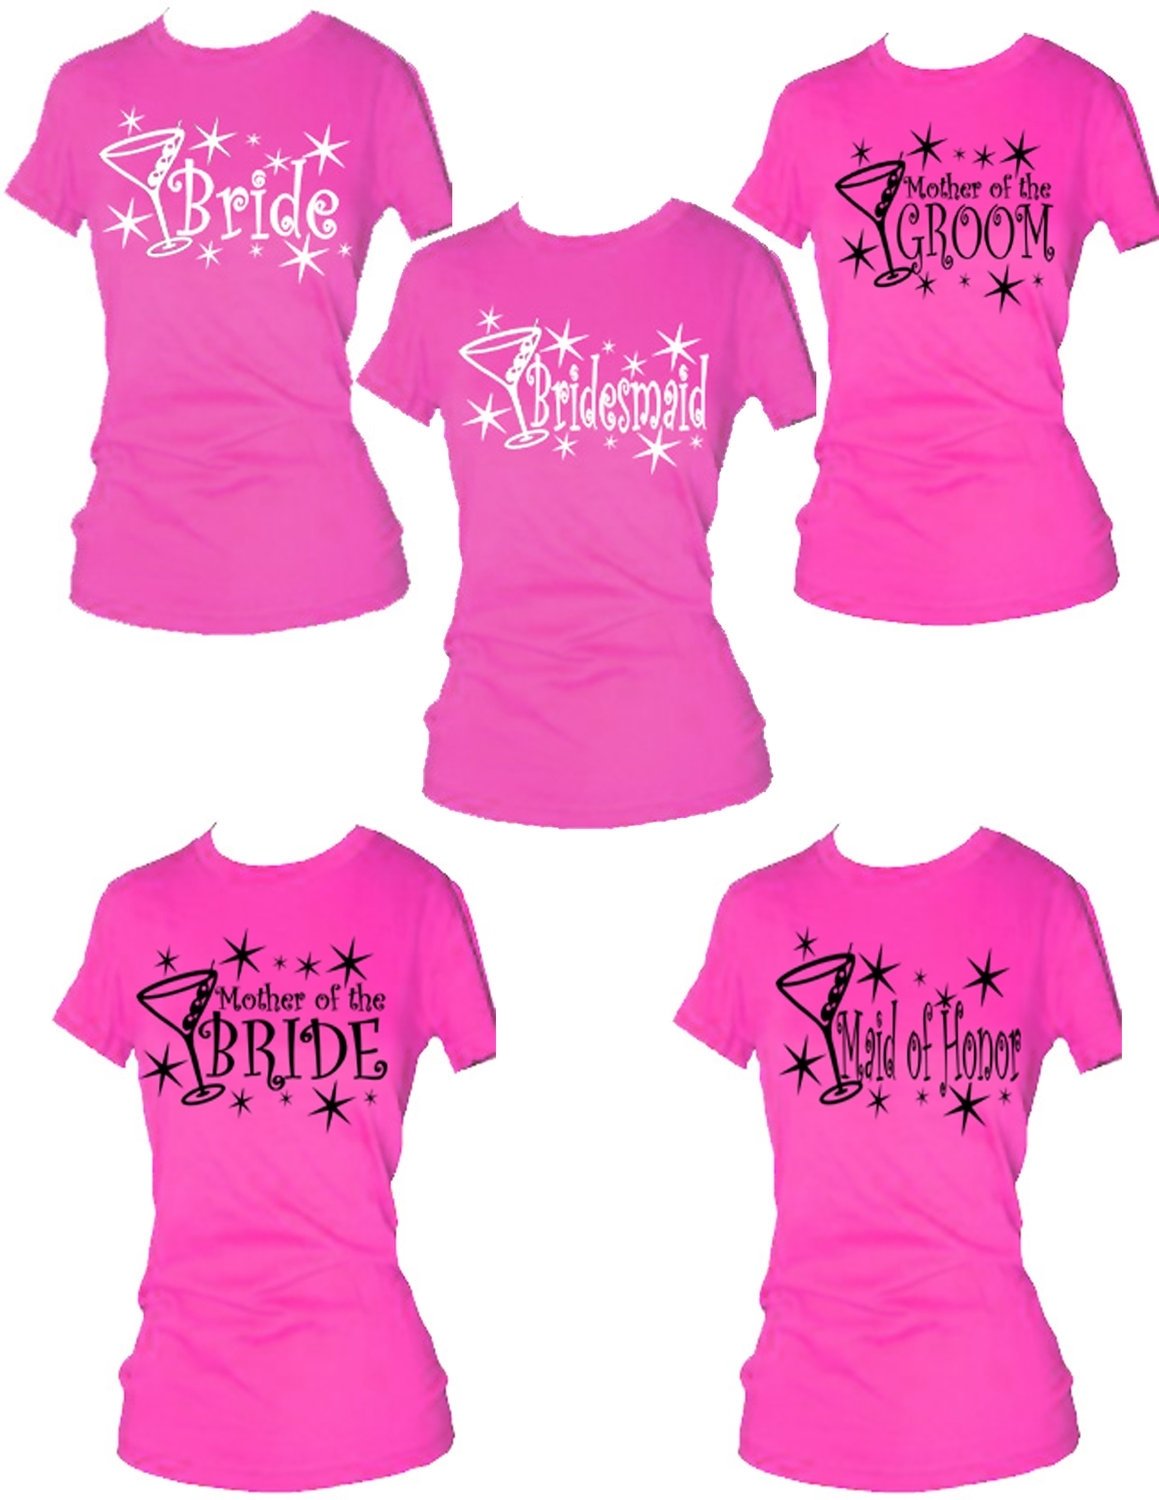 10 Attractive Bachelorette Party T Shirt Ideas set of 19 bridal party t shirts bachelor and bachelorette party for 2022